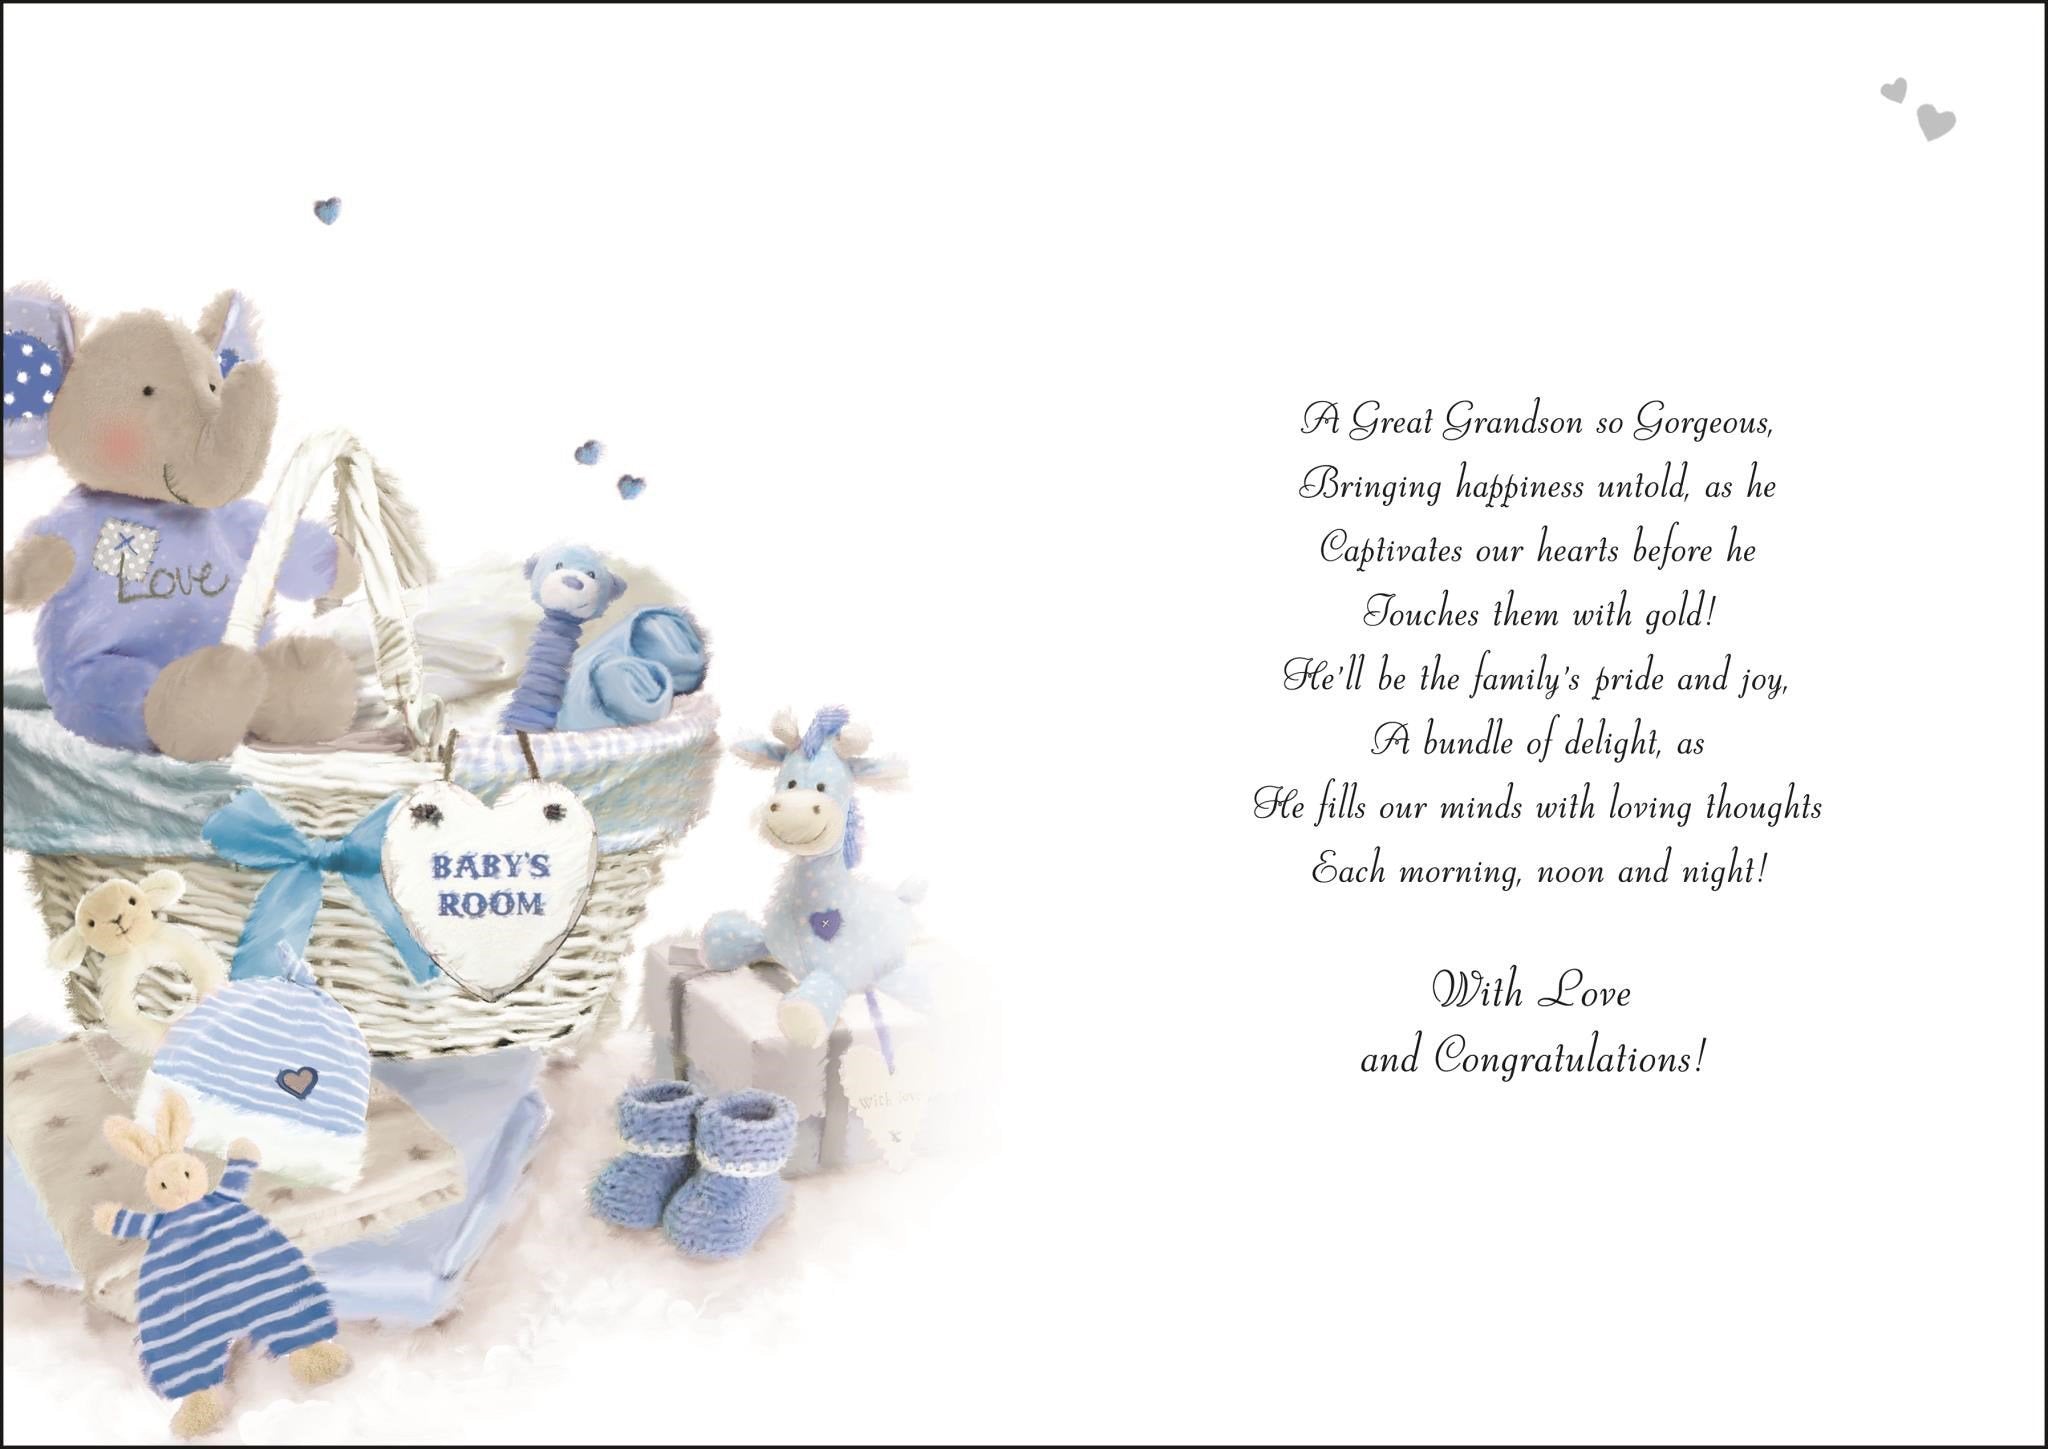 Inside of Thank You for a Great Grandson Greetings Card